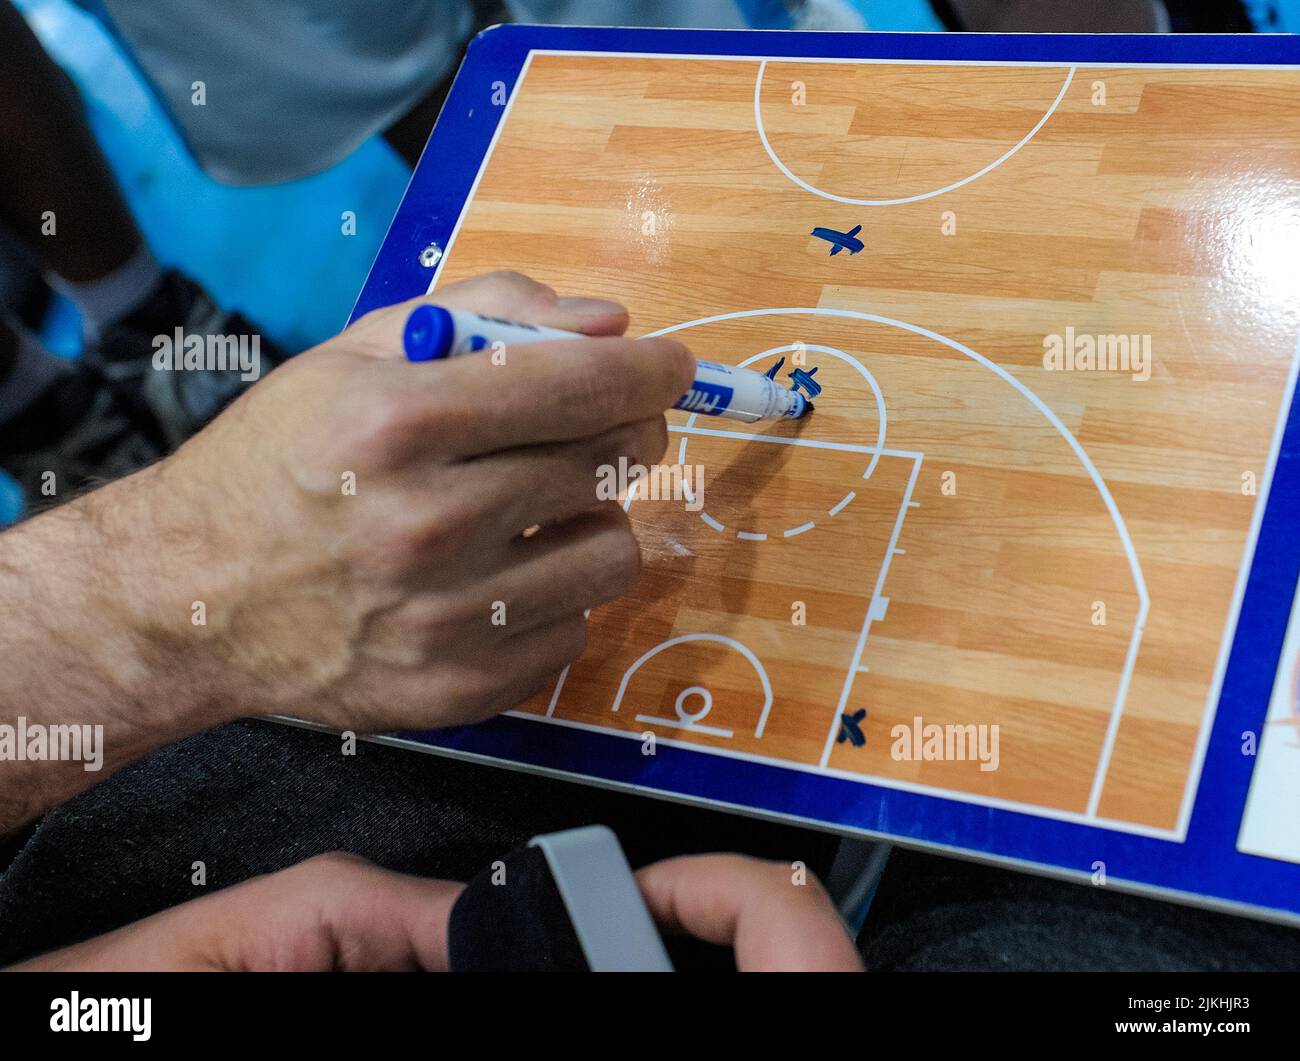 A person's hand with a marker taking notes on a football field board - game strategy concept Stock Photo